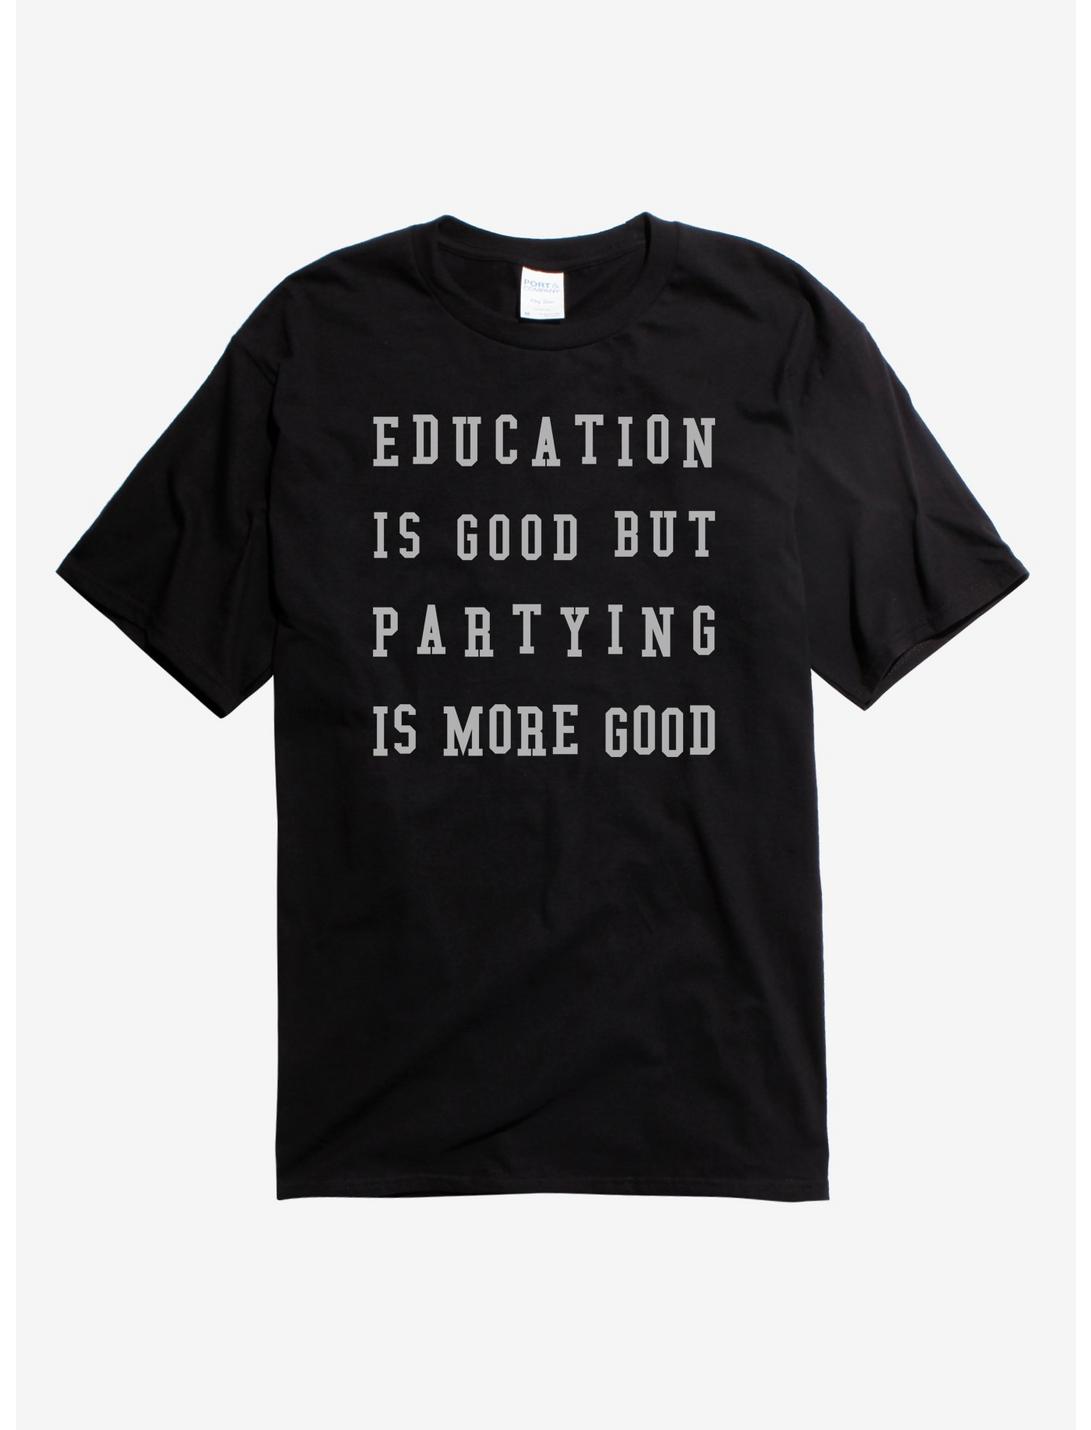 Partying Is More Good T-Shirt, BLACK, hi-res